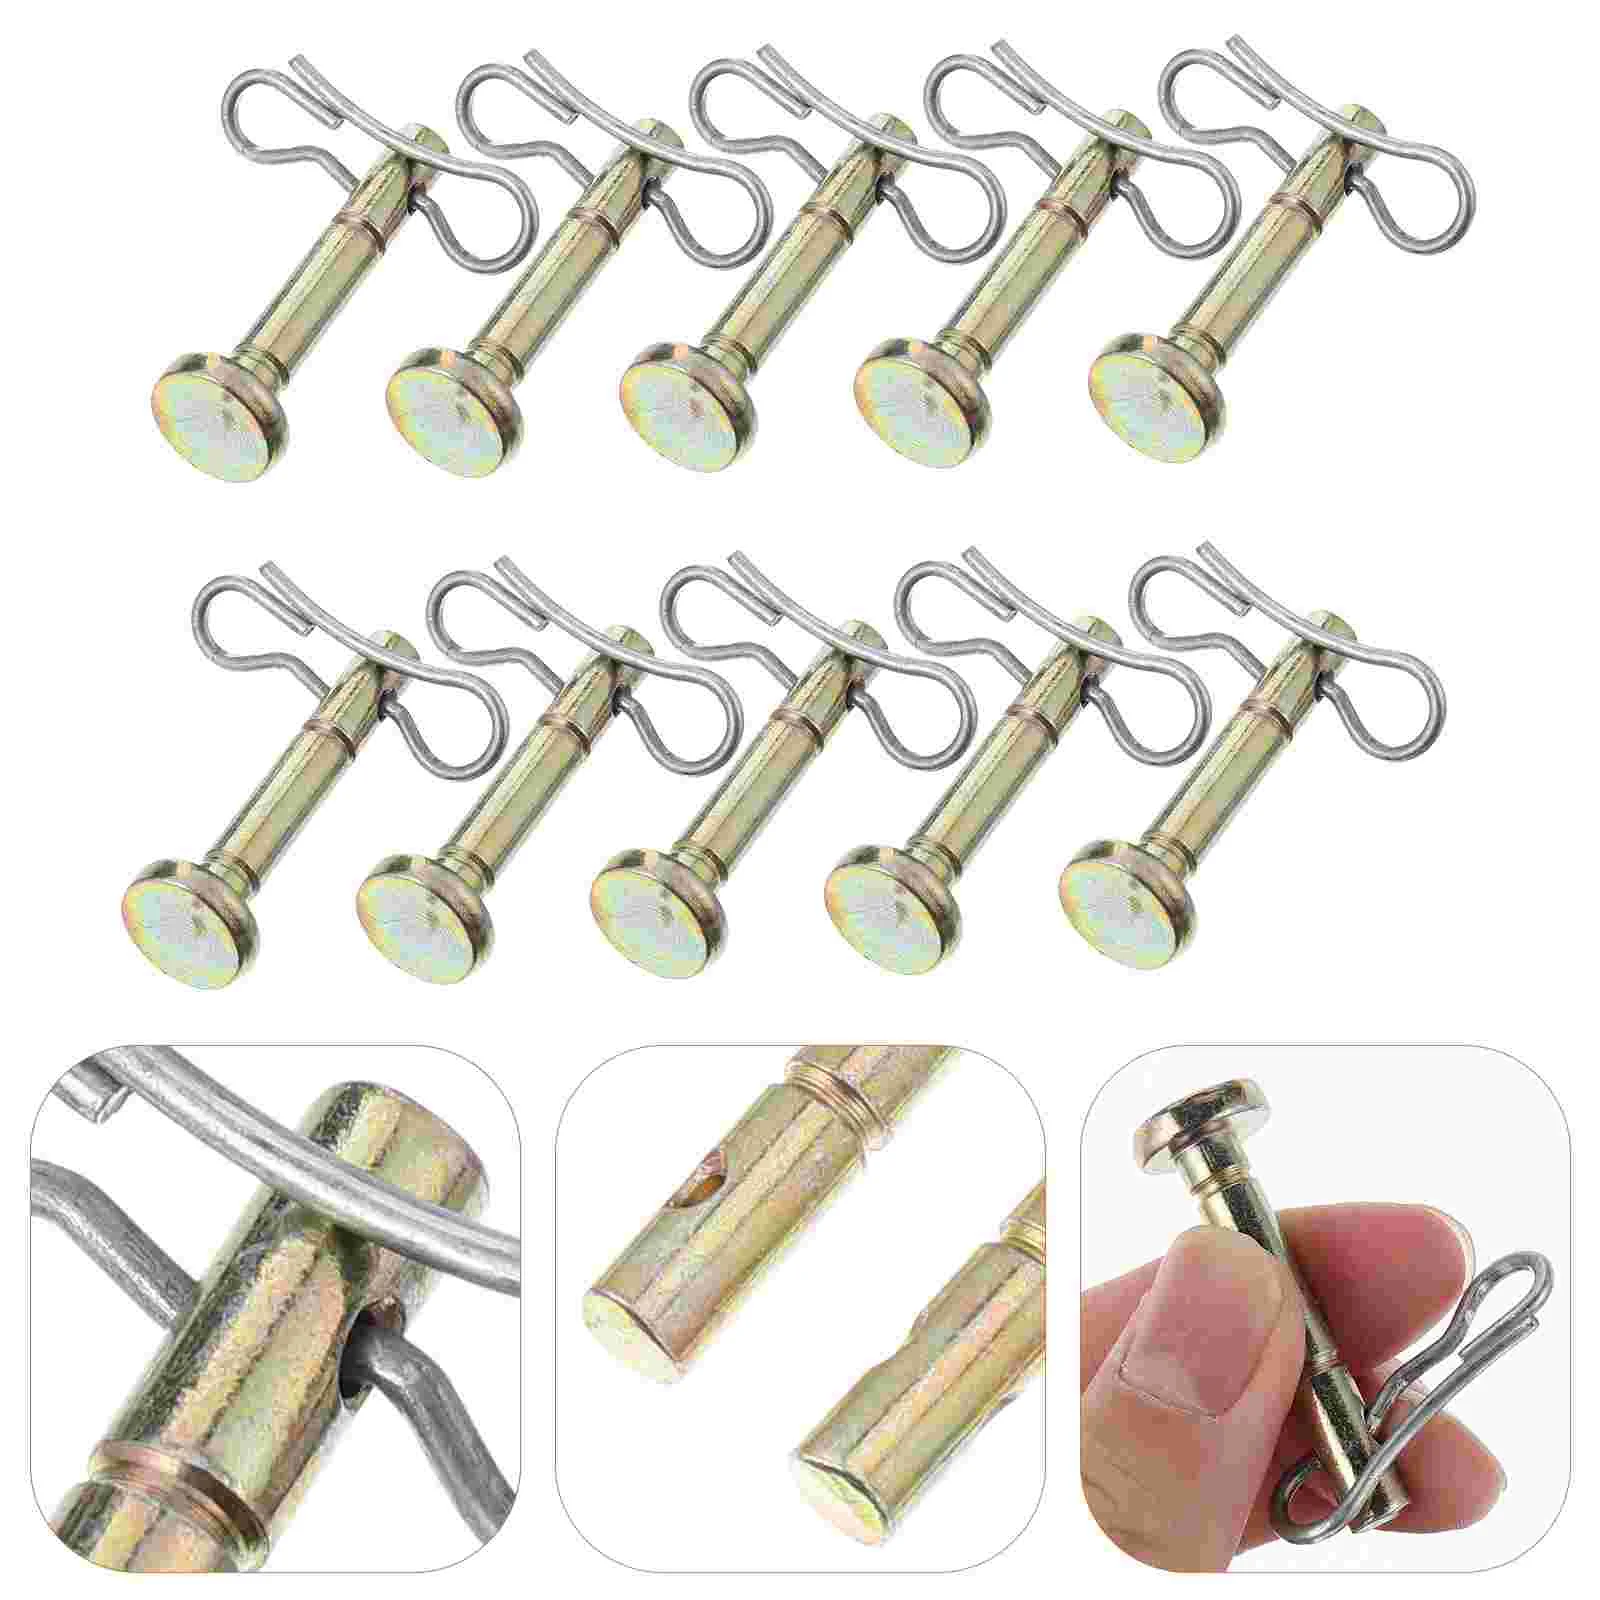 

20pcs Shear Pin Cotter Pin Replacement Tools Compatible for Snow Blower 738- 04124 714- 04040